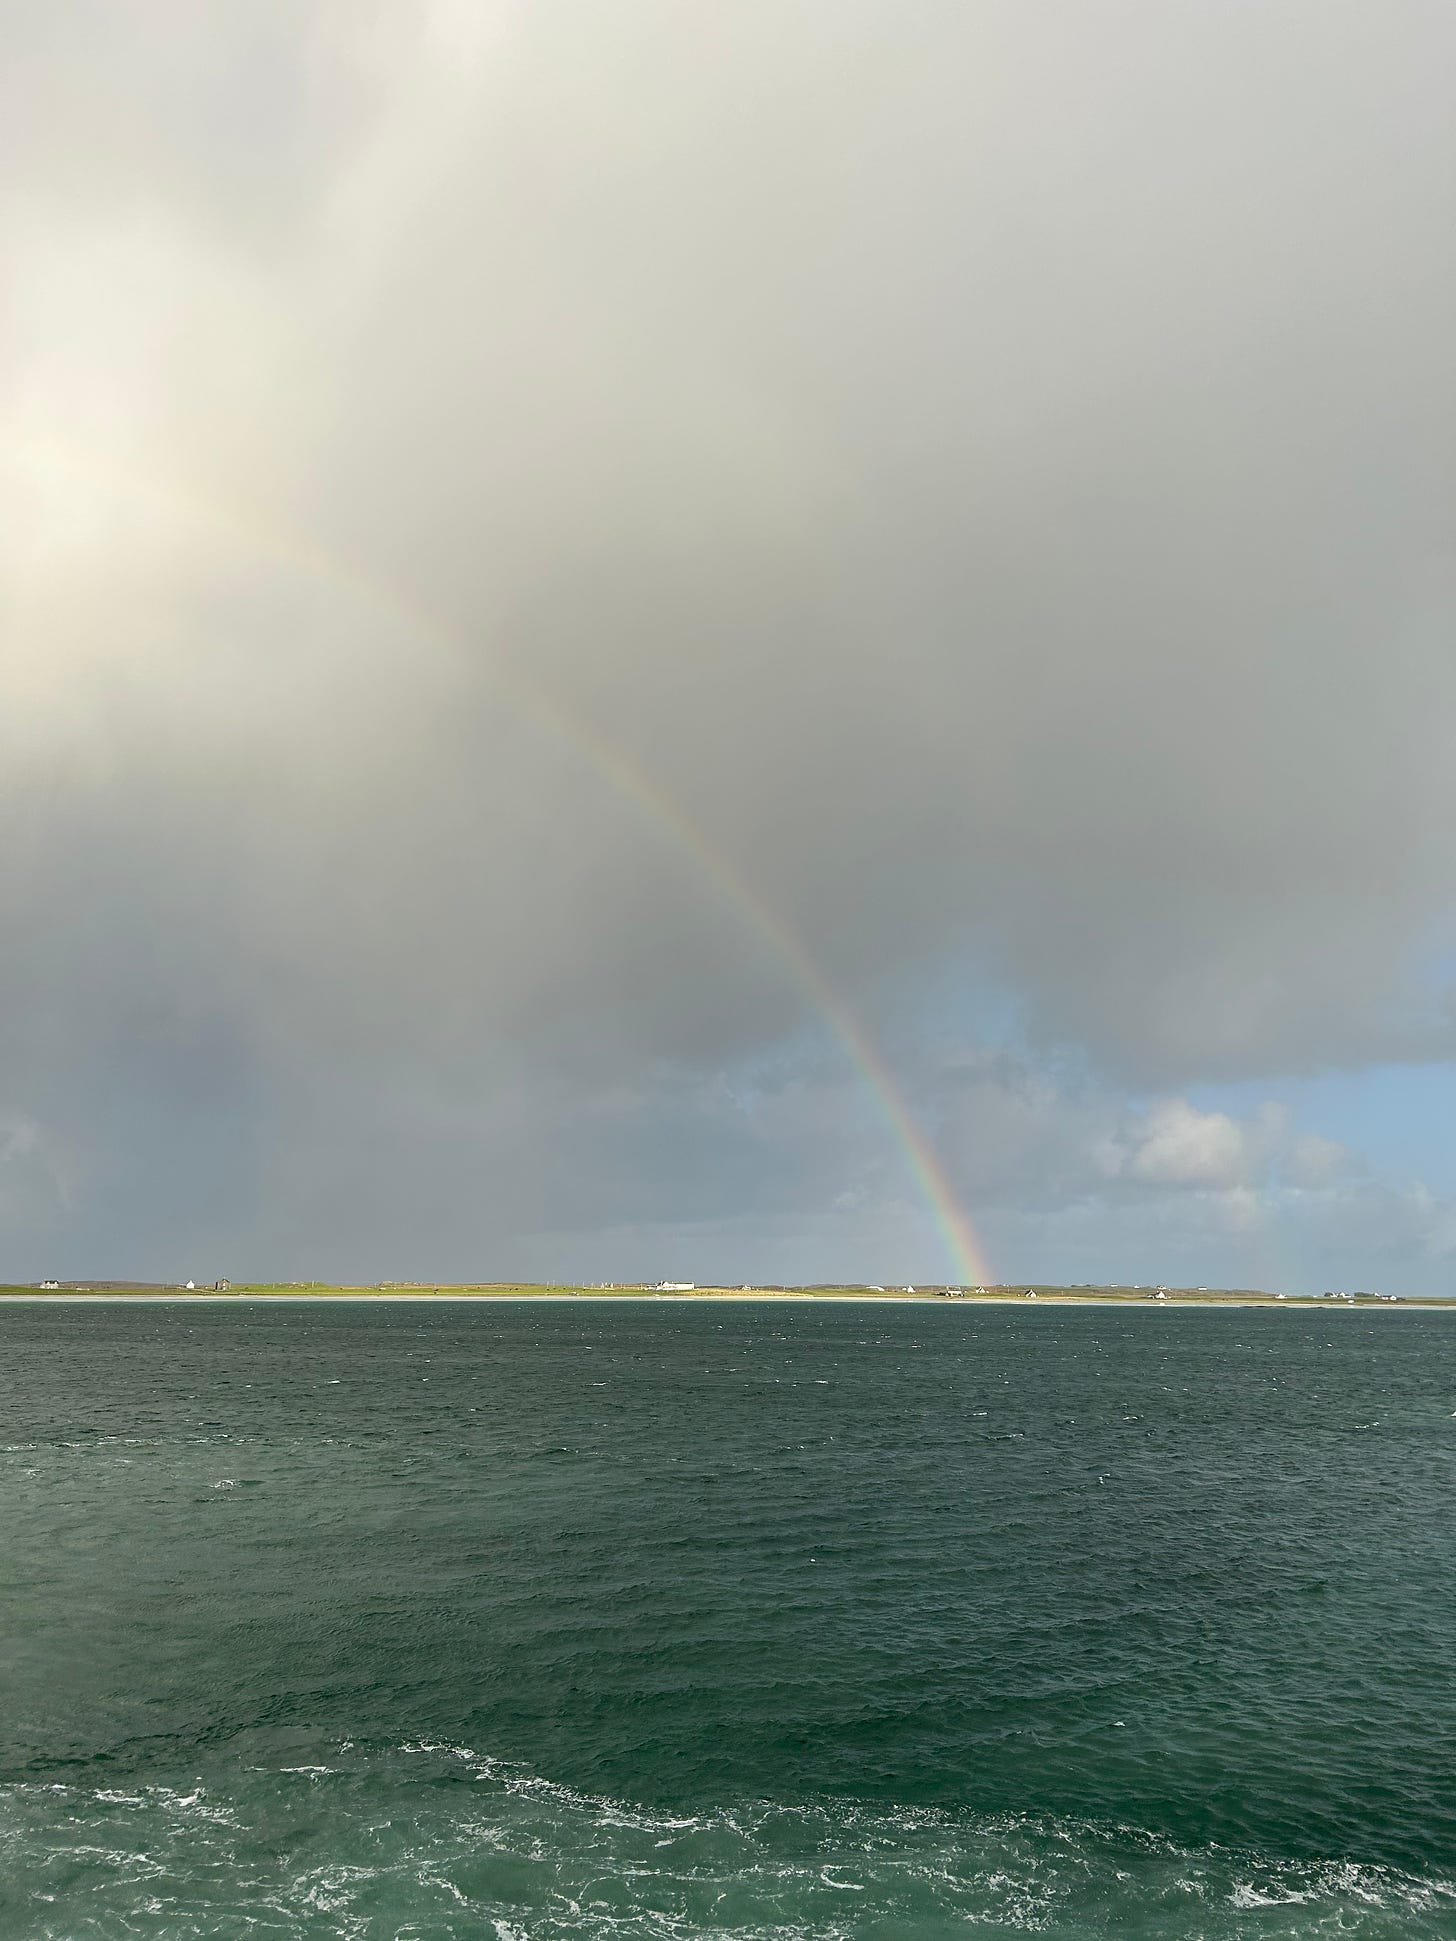 A rainbow arcs over a long, low green island dotted with white cottages. The sky around the rainbow is grey and stormy.